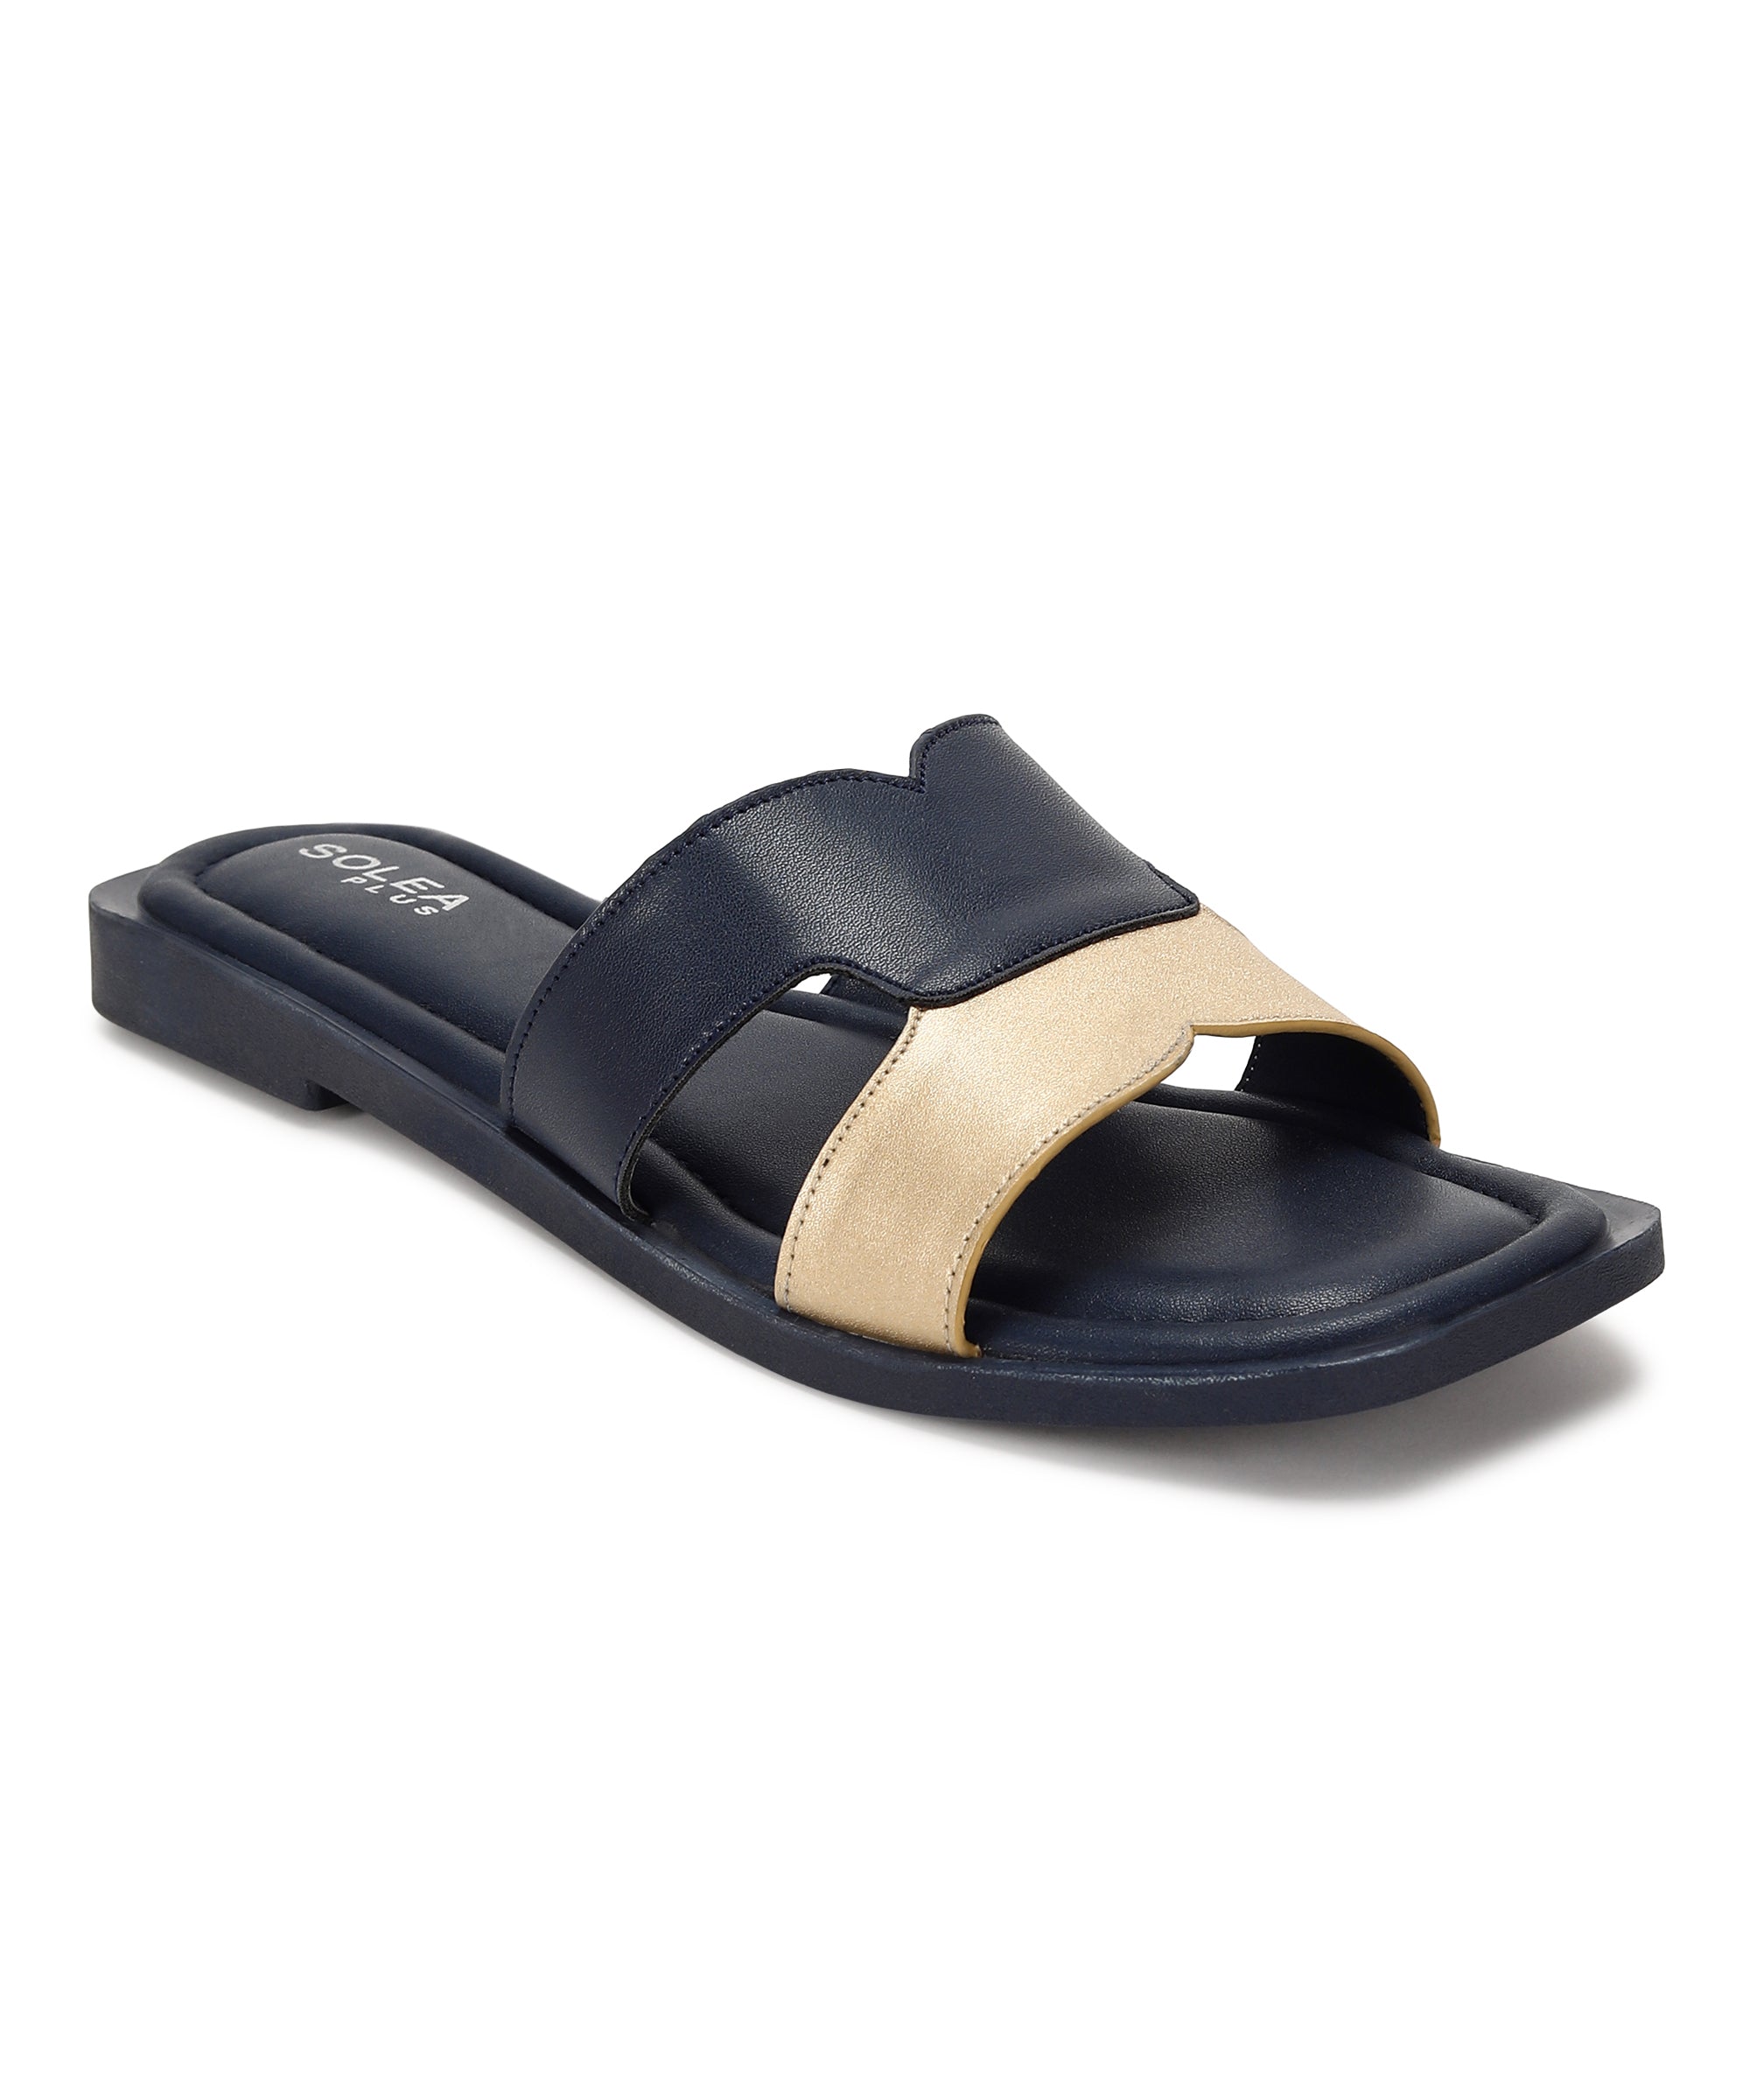 Paragon RK6023L Women Sandals | Casual &amp; Formal Sandals | Stylish, Comfortable &amp; Durable | For Daily &amp; Occasion Wear